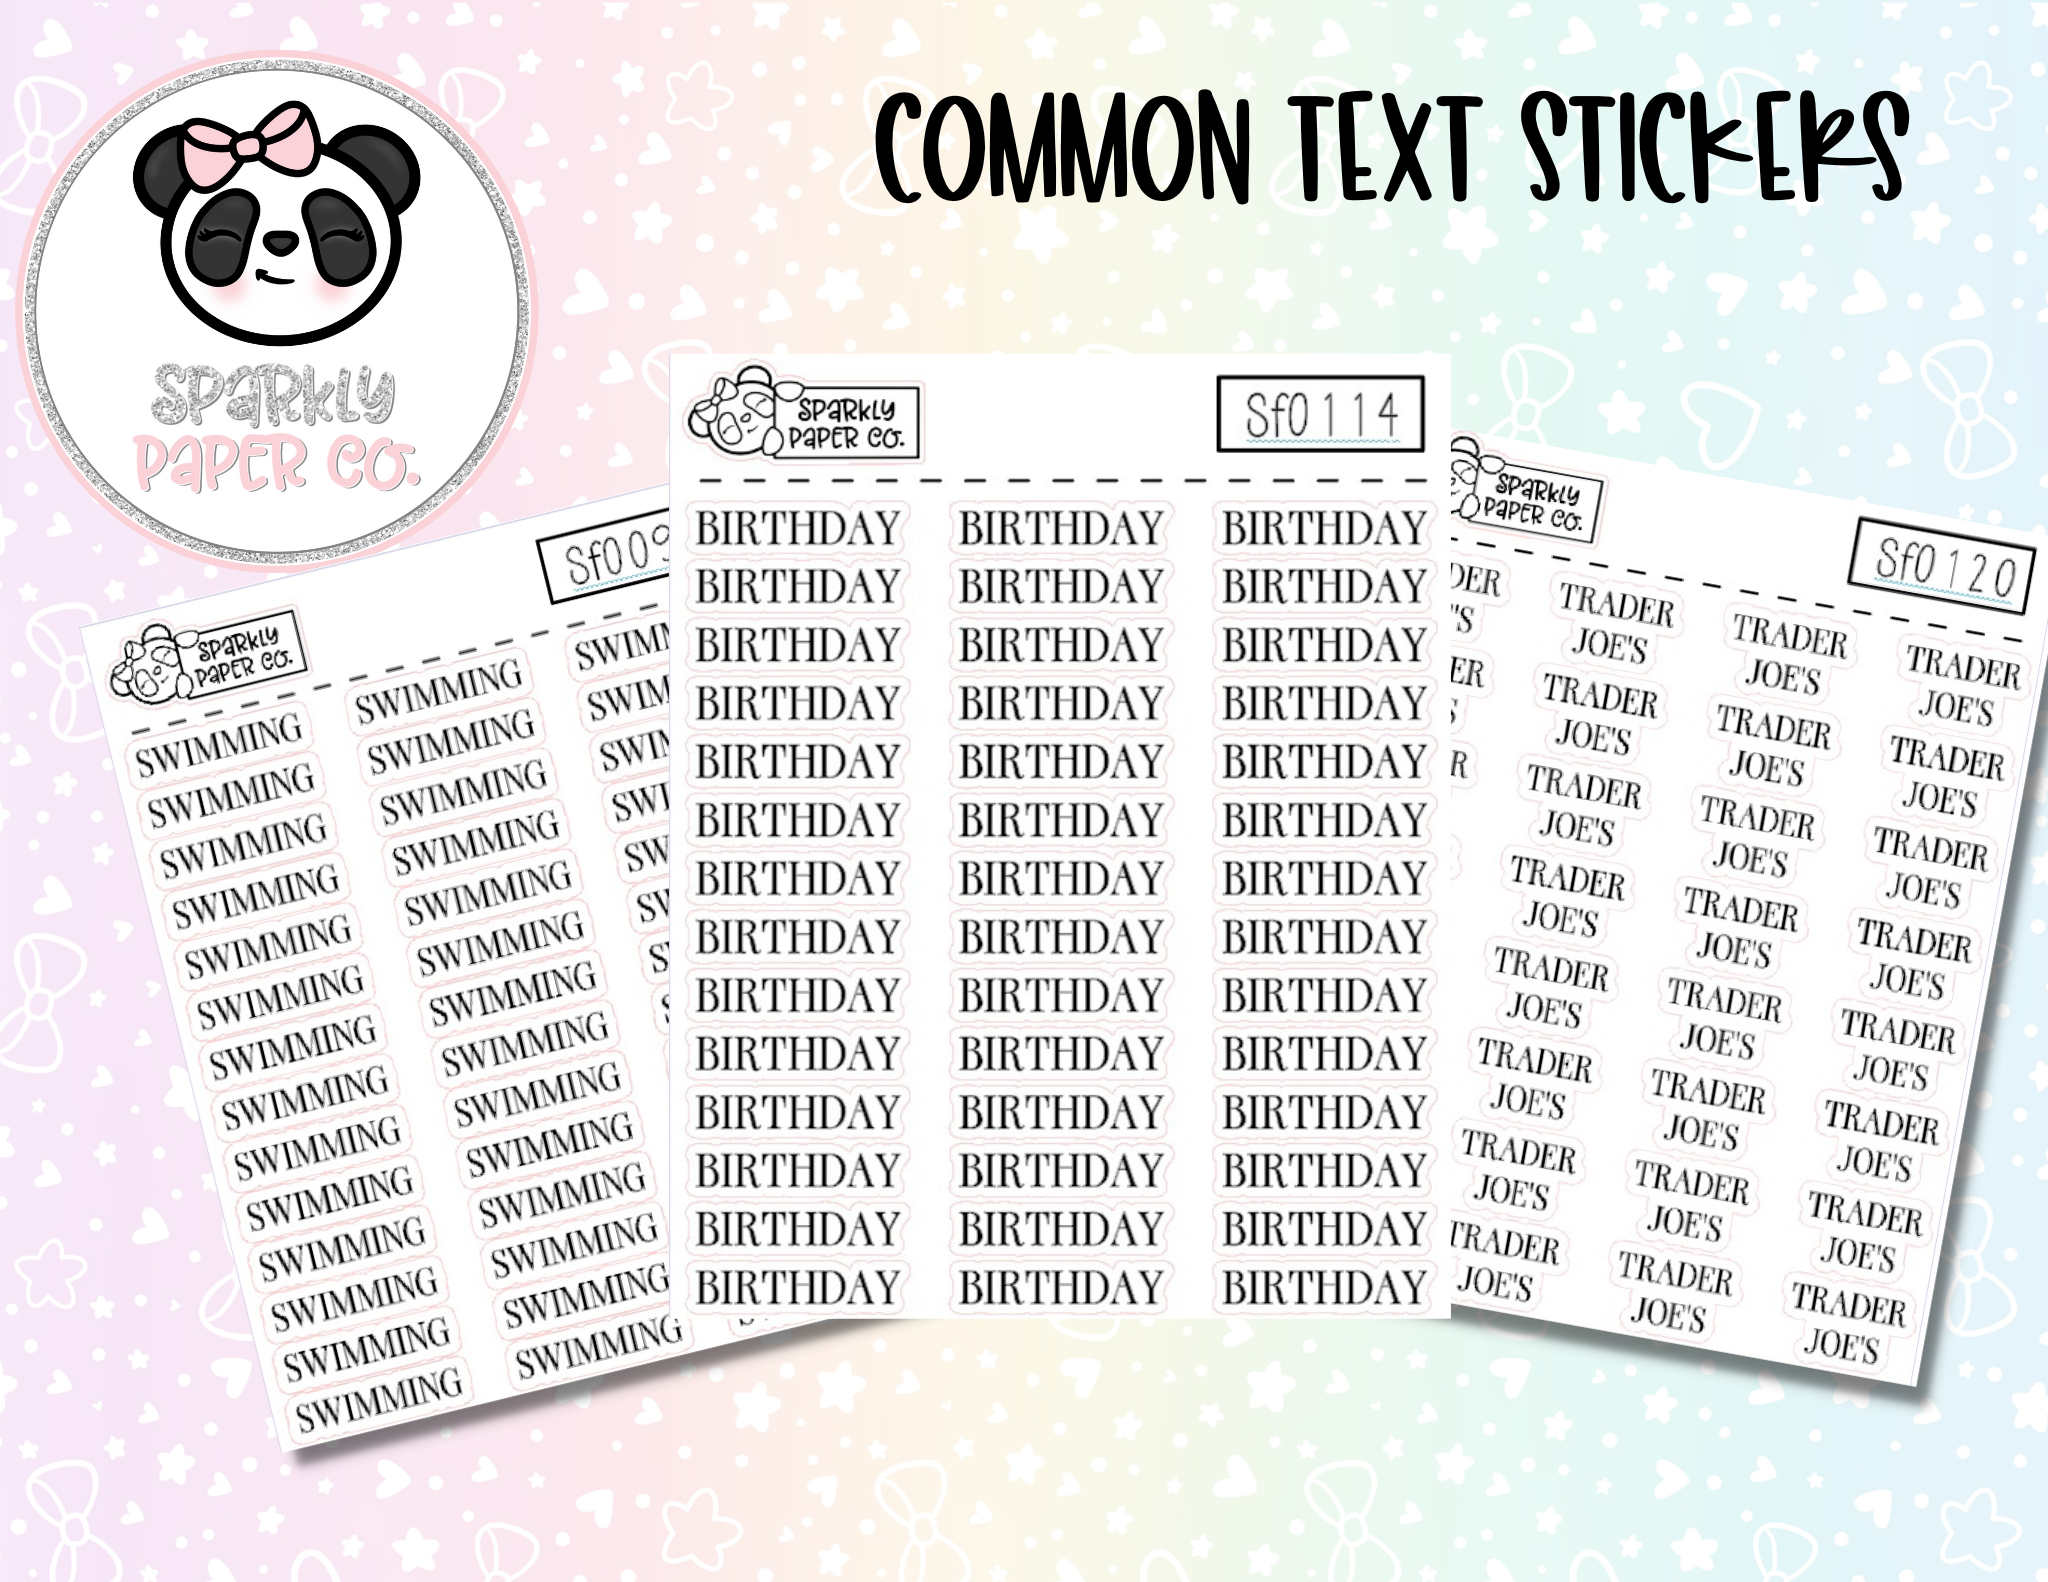 Common Text Stickers